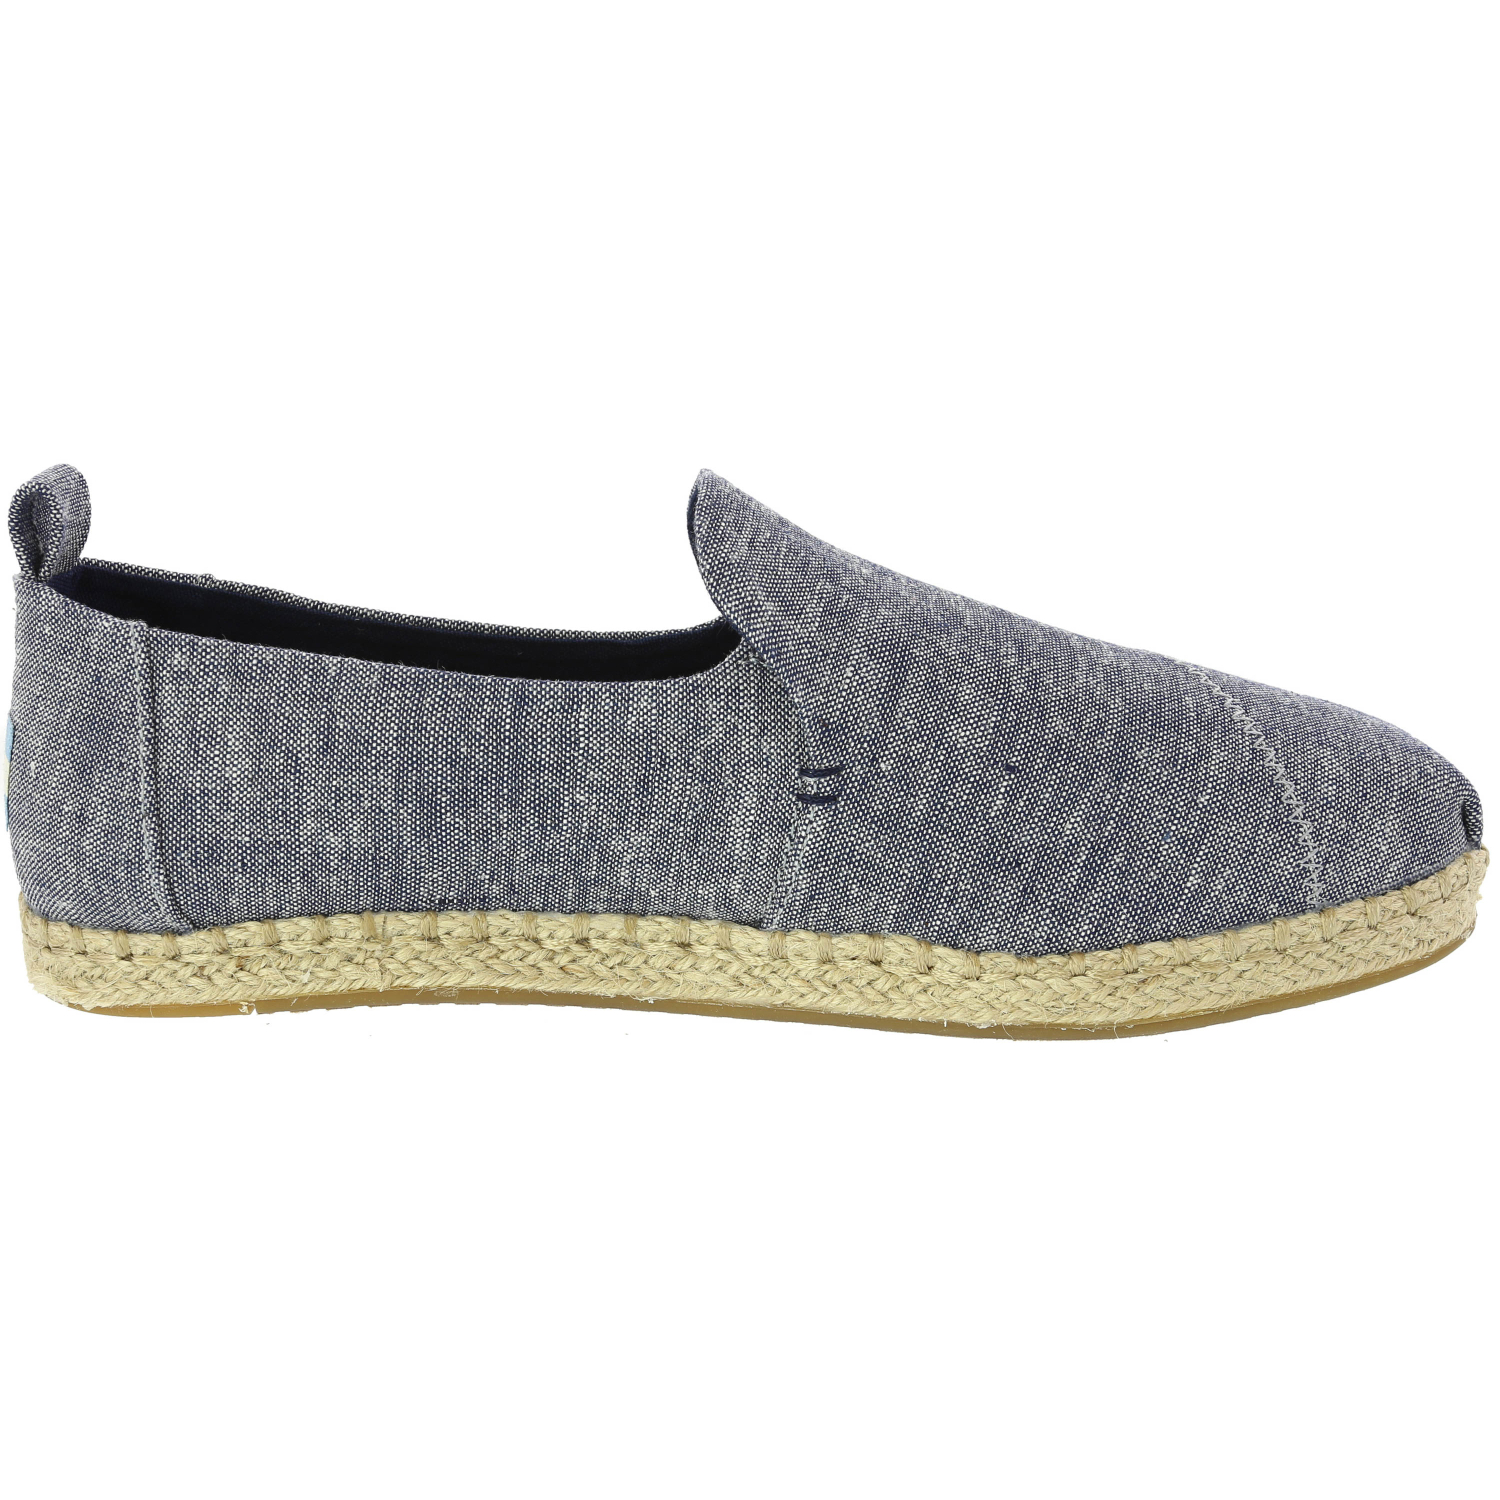 Toms Women's Deconstructed Alpargata Chambray Ankle-High ...